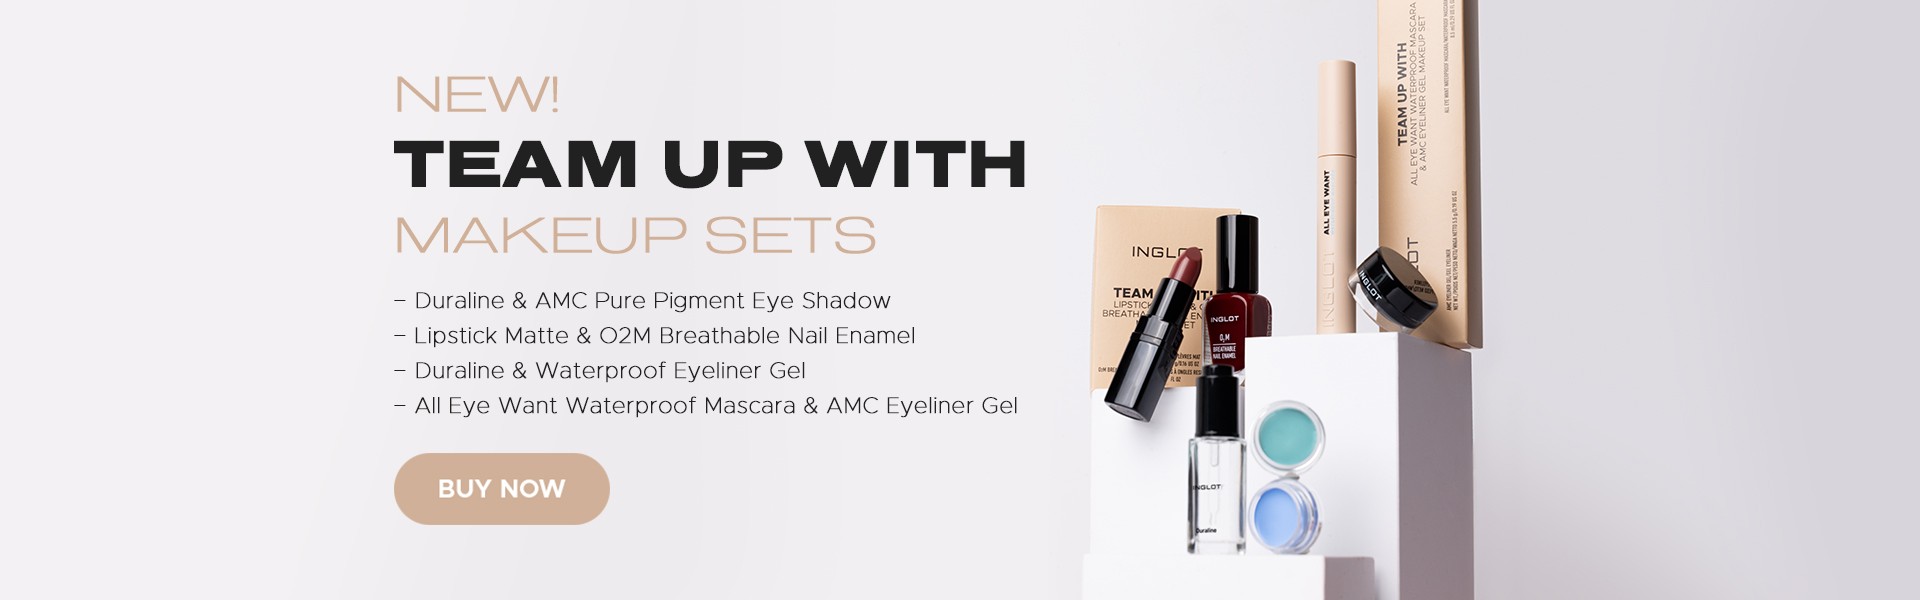 TEAM UP WITH MAKEUP SETS